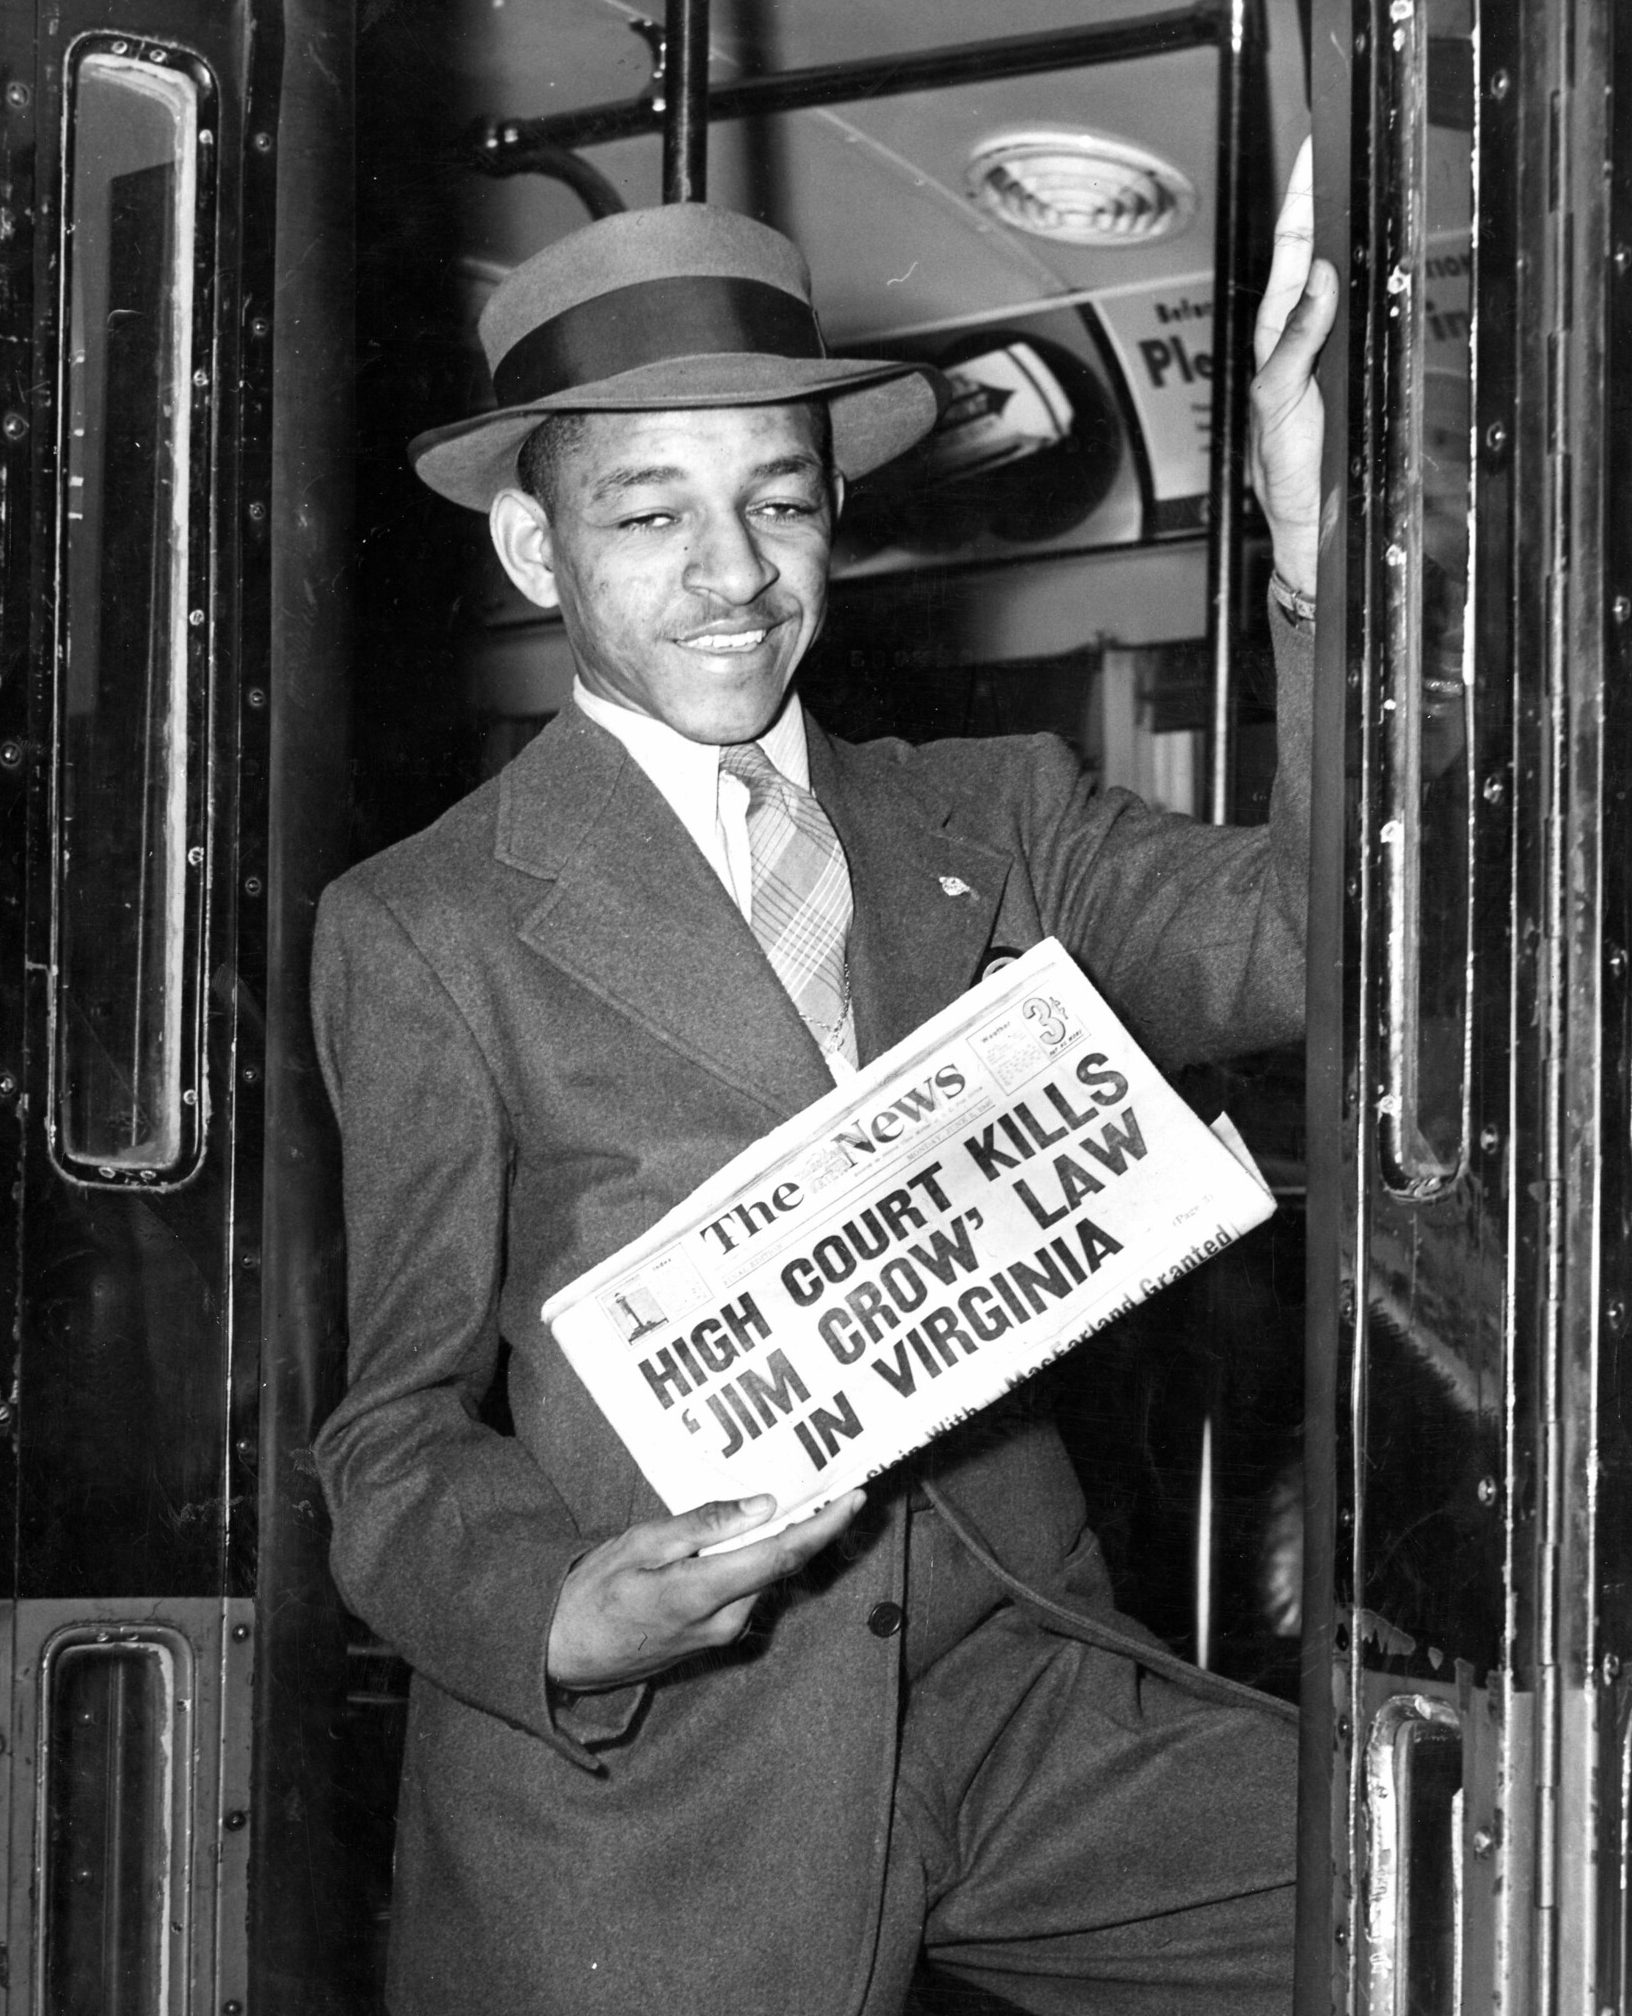 James H. Thomas, 23, of Washington D.C. boards the bus for a trip to Virginia on June 4, 1946, the day after the U.S. Supreme Court struck down the Virginia law that mandated racial segregation of interstate buses. DC Public Library, Star Collection © Washington Post.